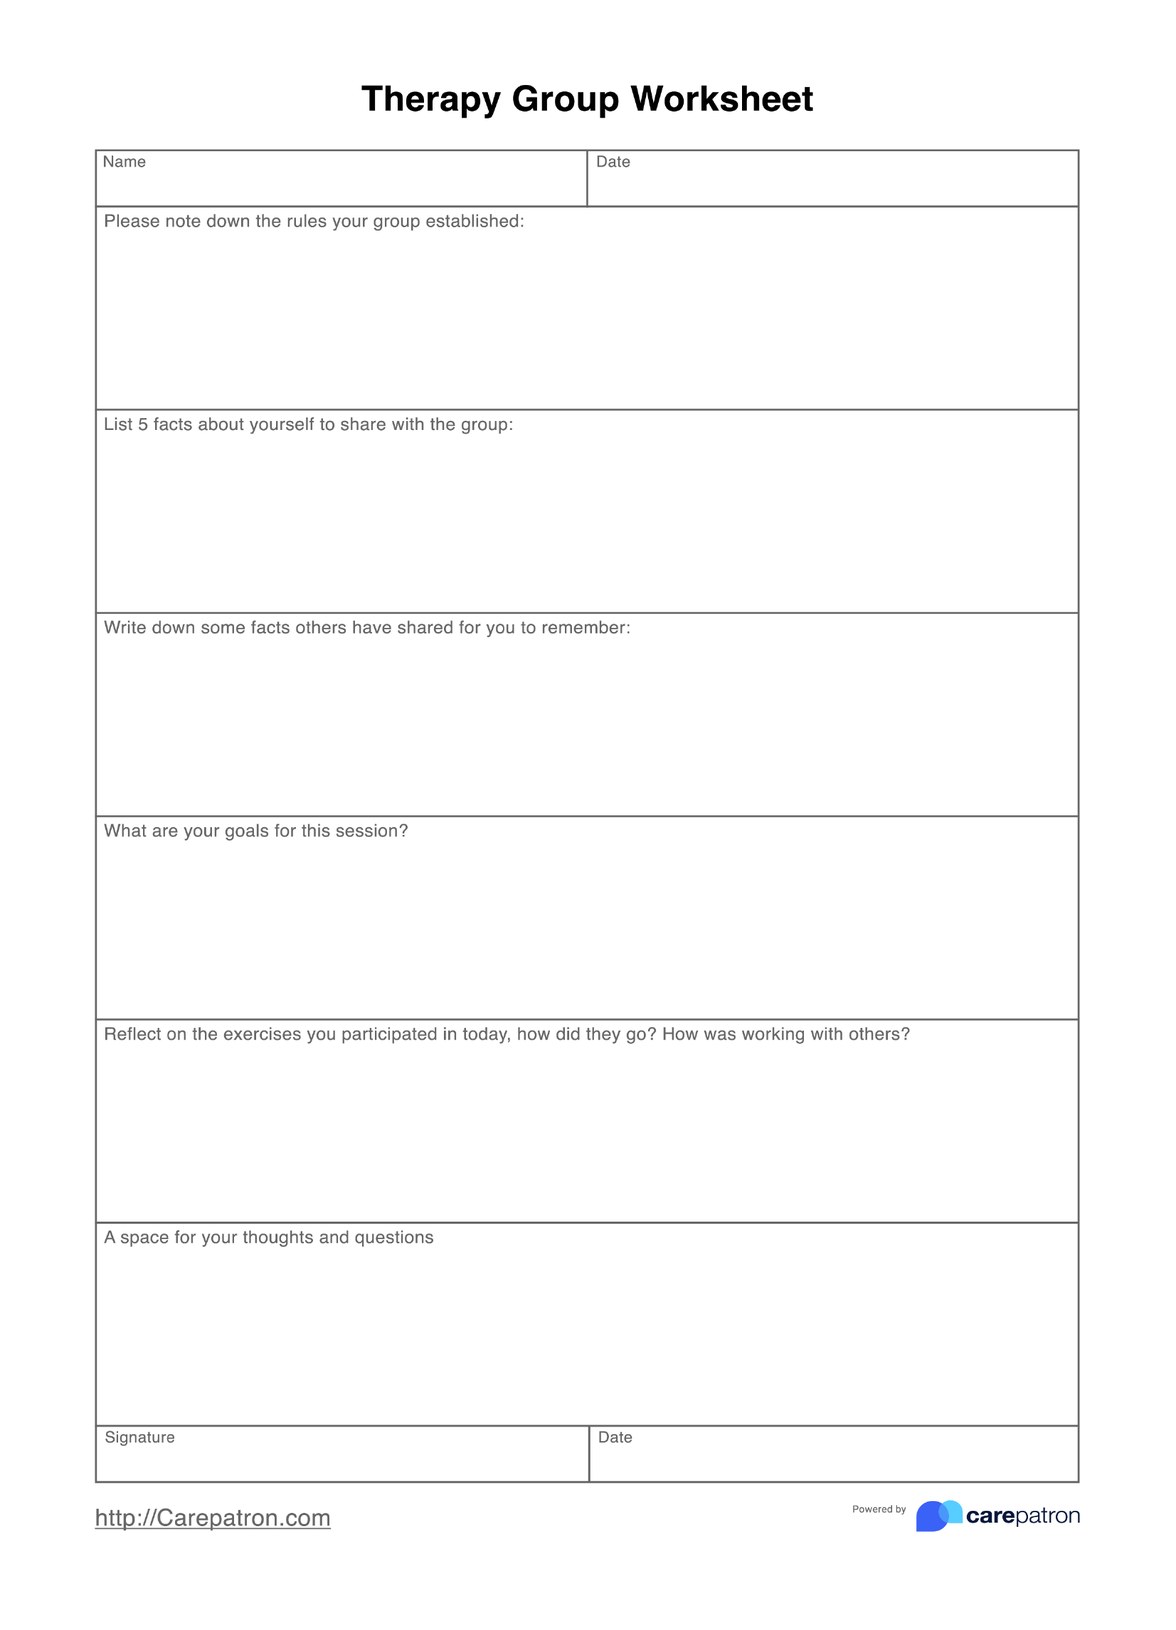 Therapy Group Worksheets PDF Example